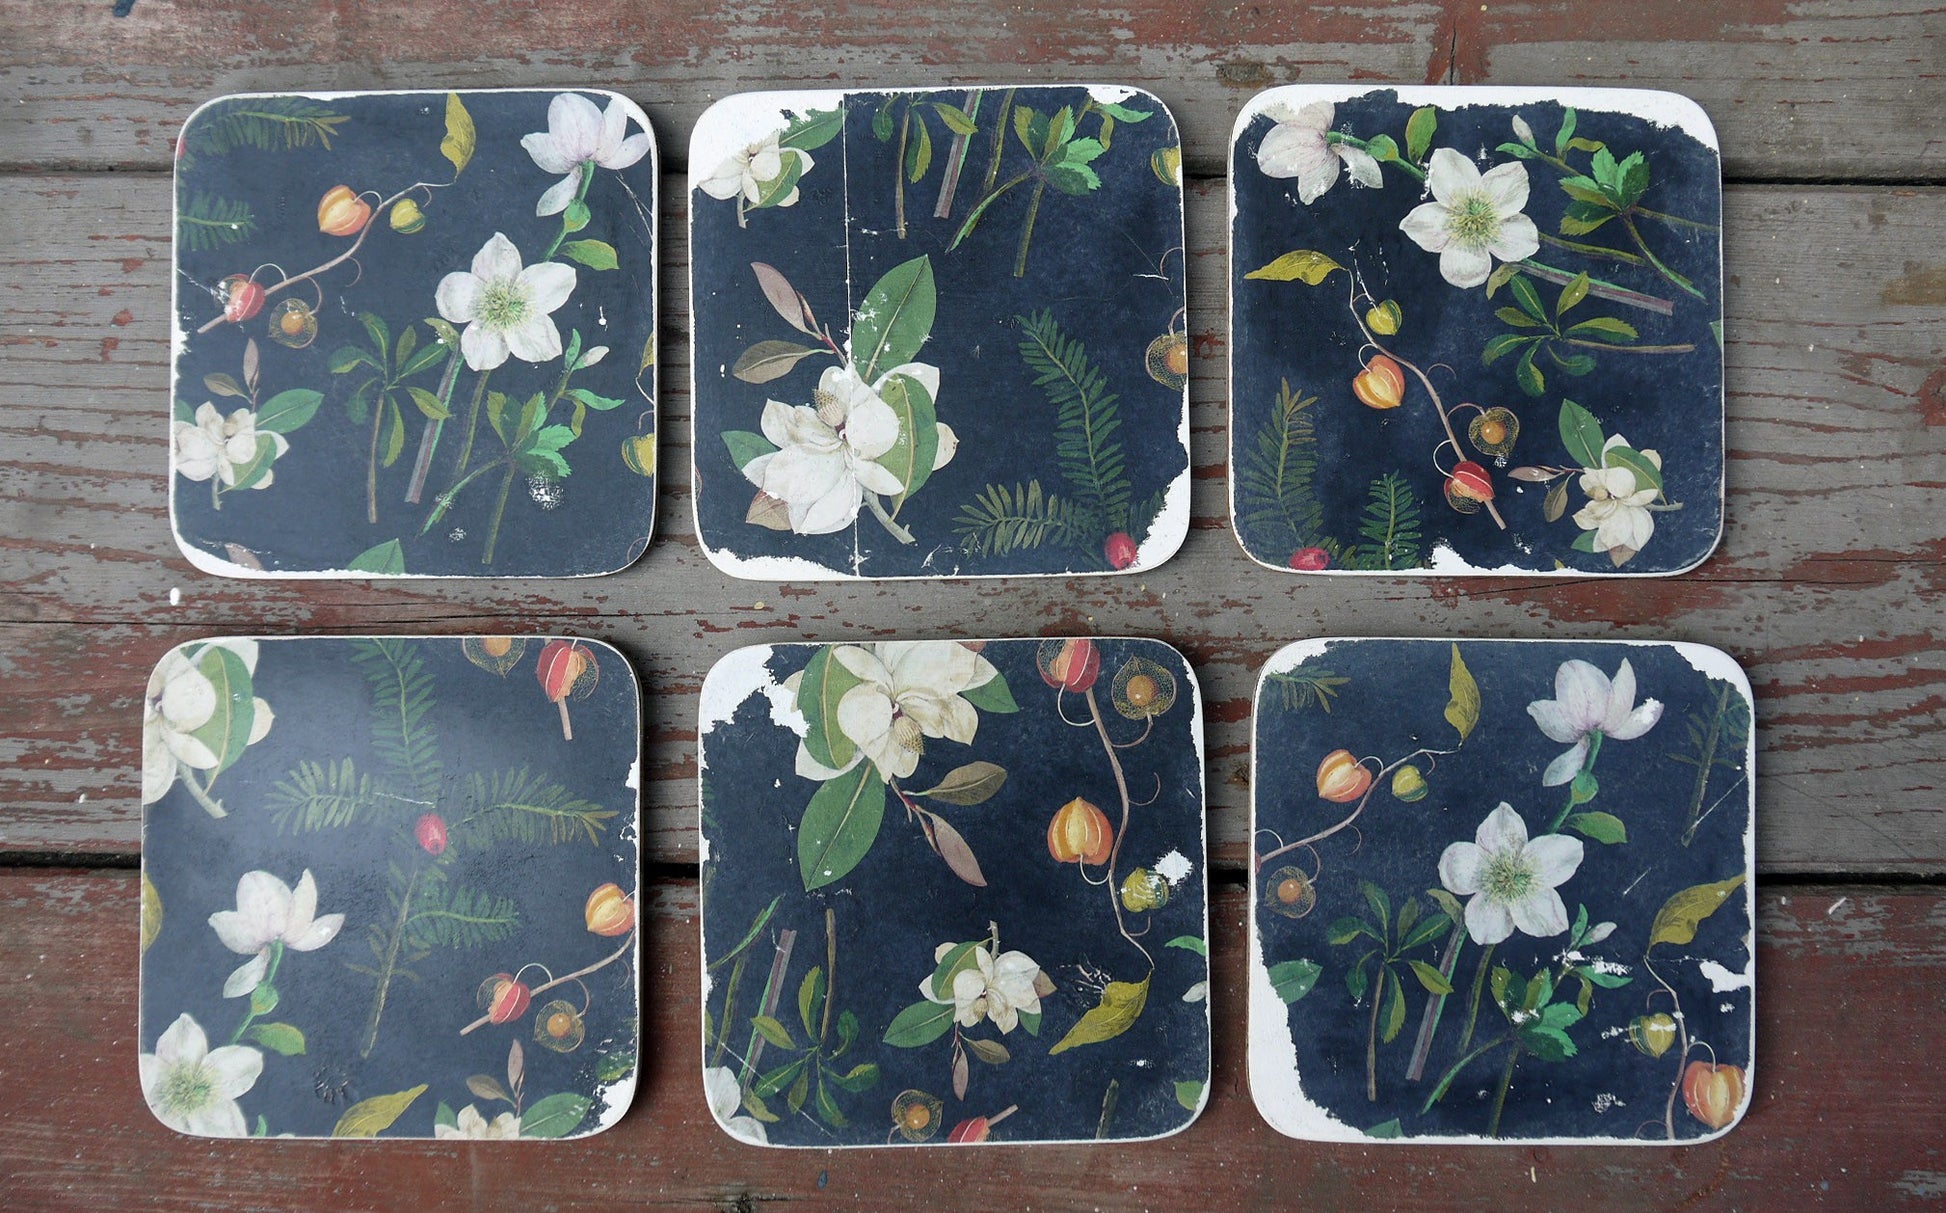 Set of six vintage paper coasters in dark grey and floral design on white.